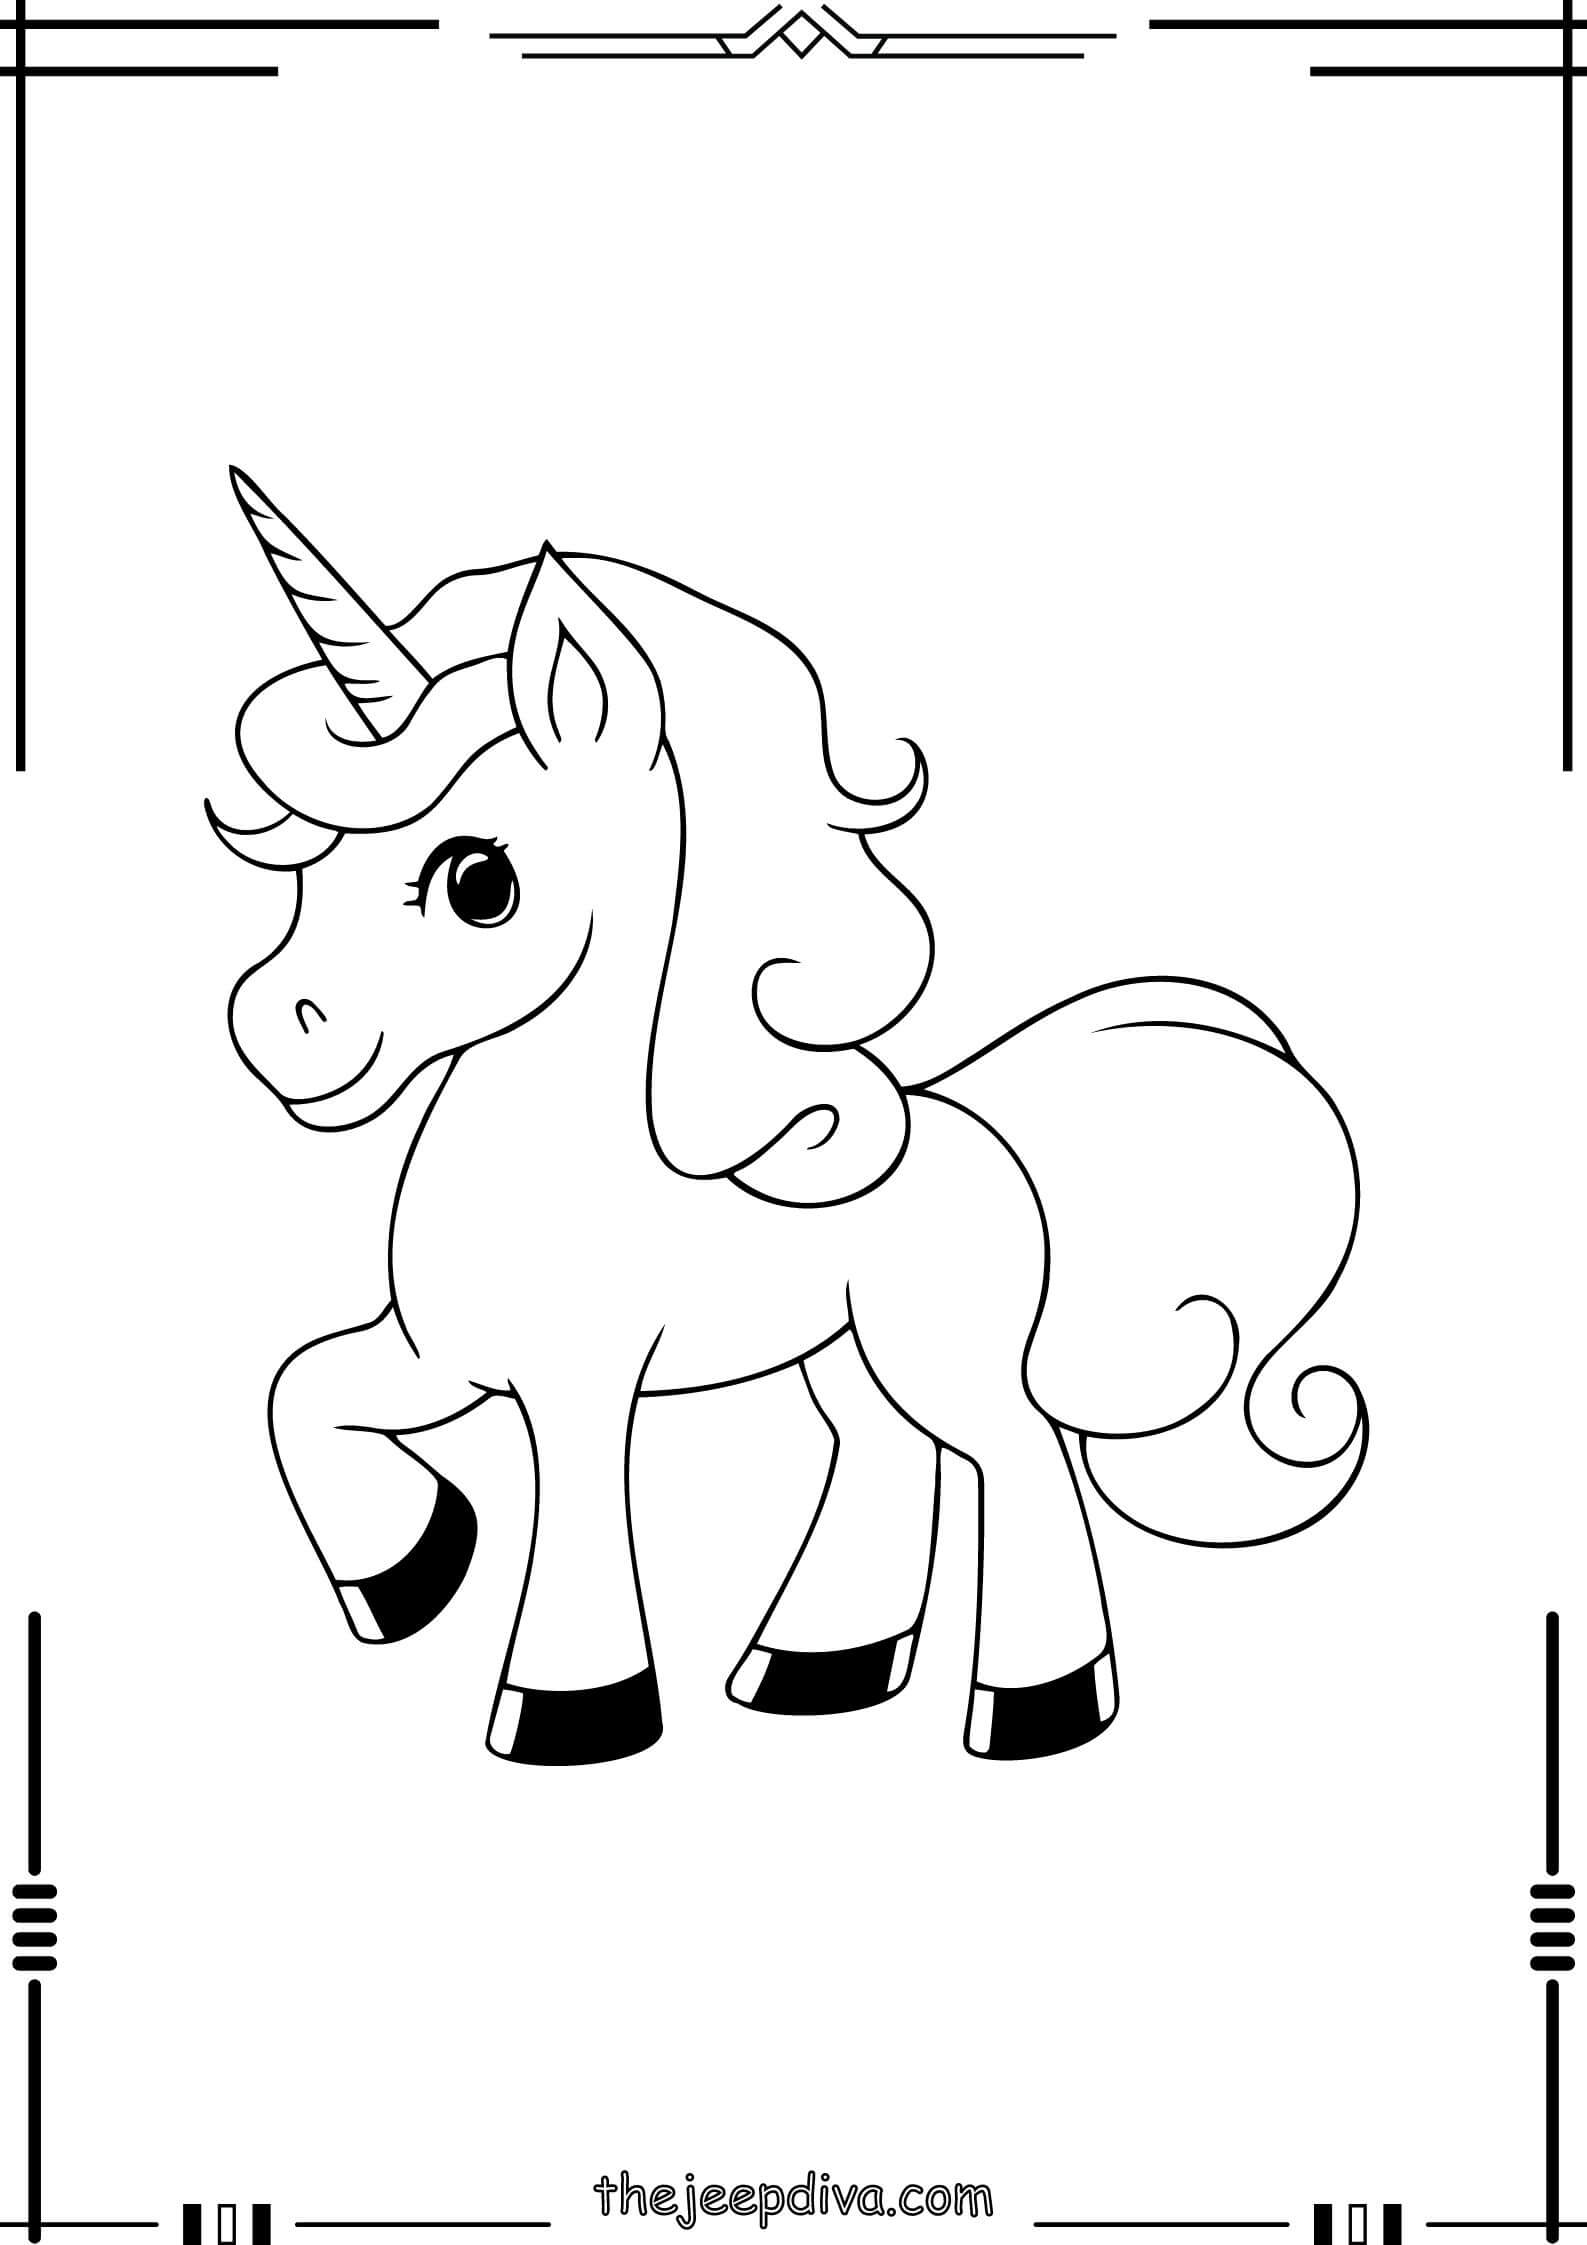 unicorn-coloring-page-easy-5